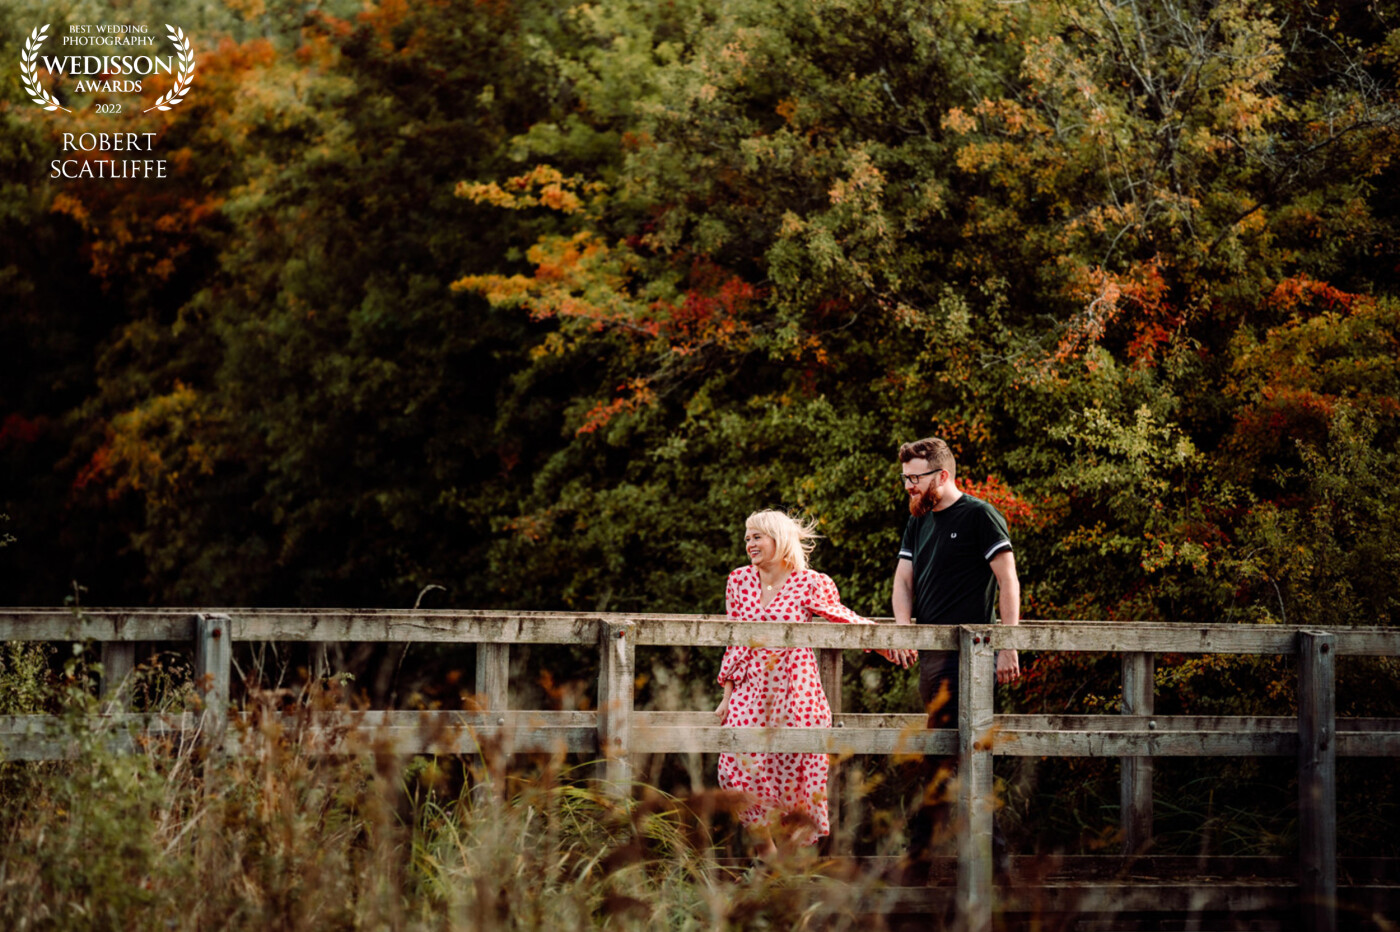 Kim & Adams pre wedding shoot was full of colour & including that in the scene to help tell the story was the first thing that popped into my head, the Autumn colours were immense !